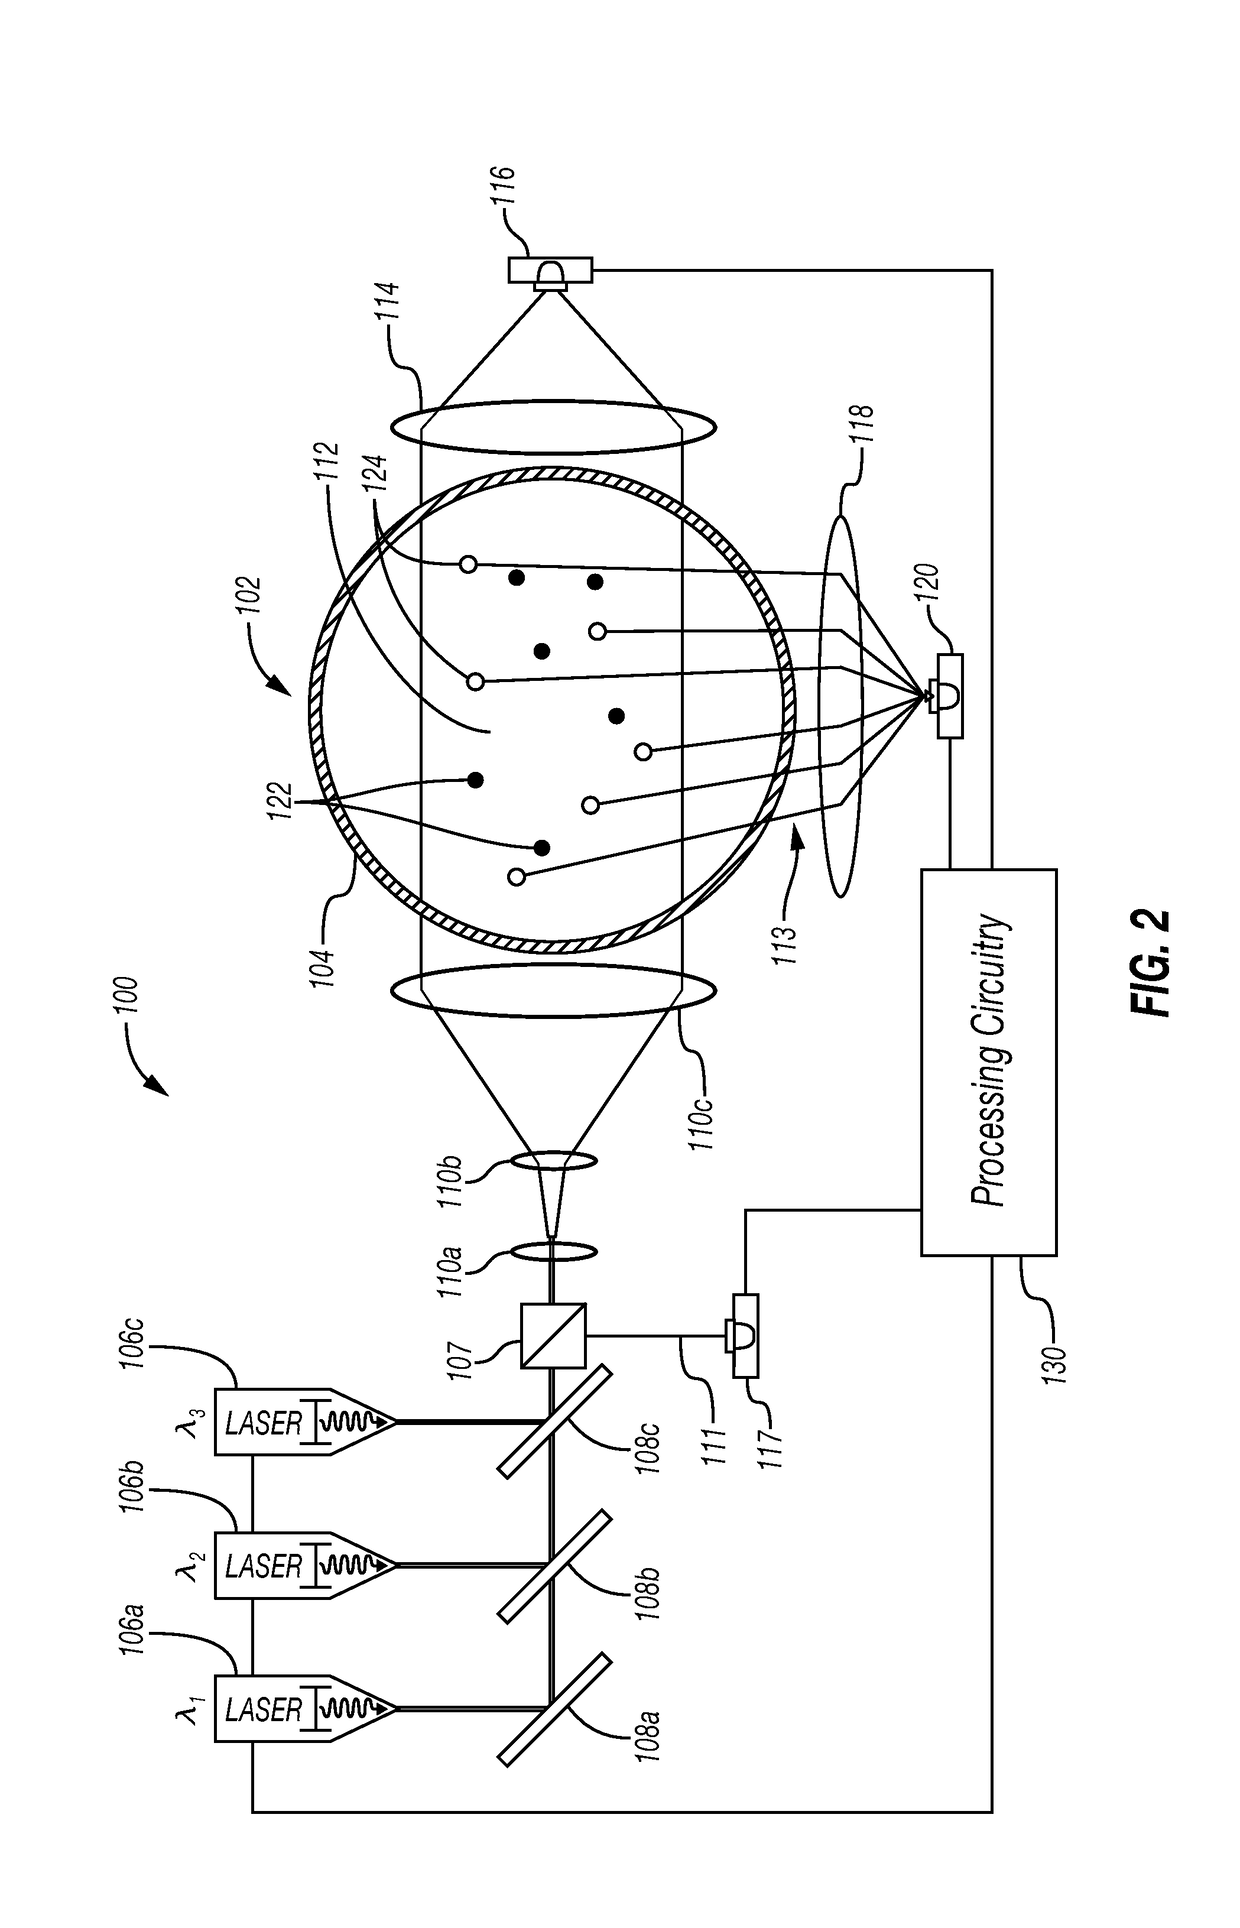 Phase fraction measurement using continuously adjusted light source